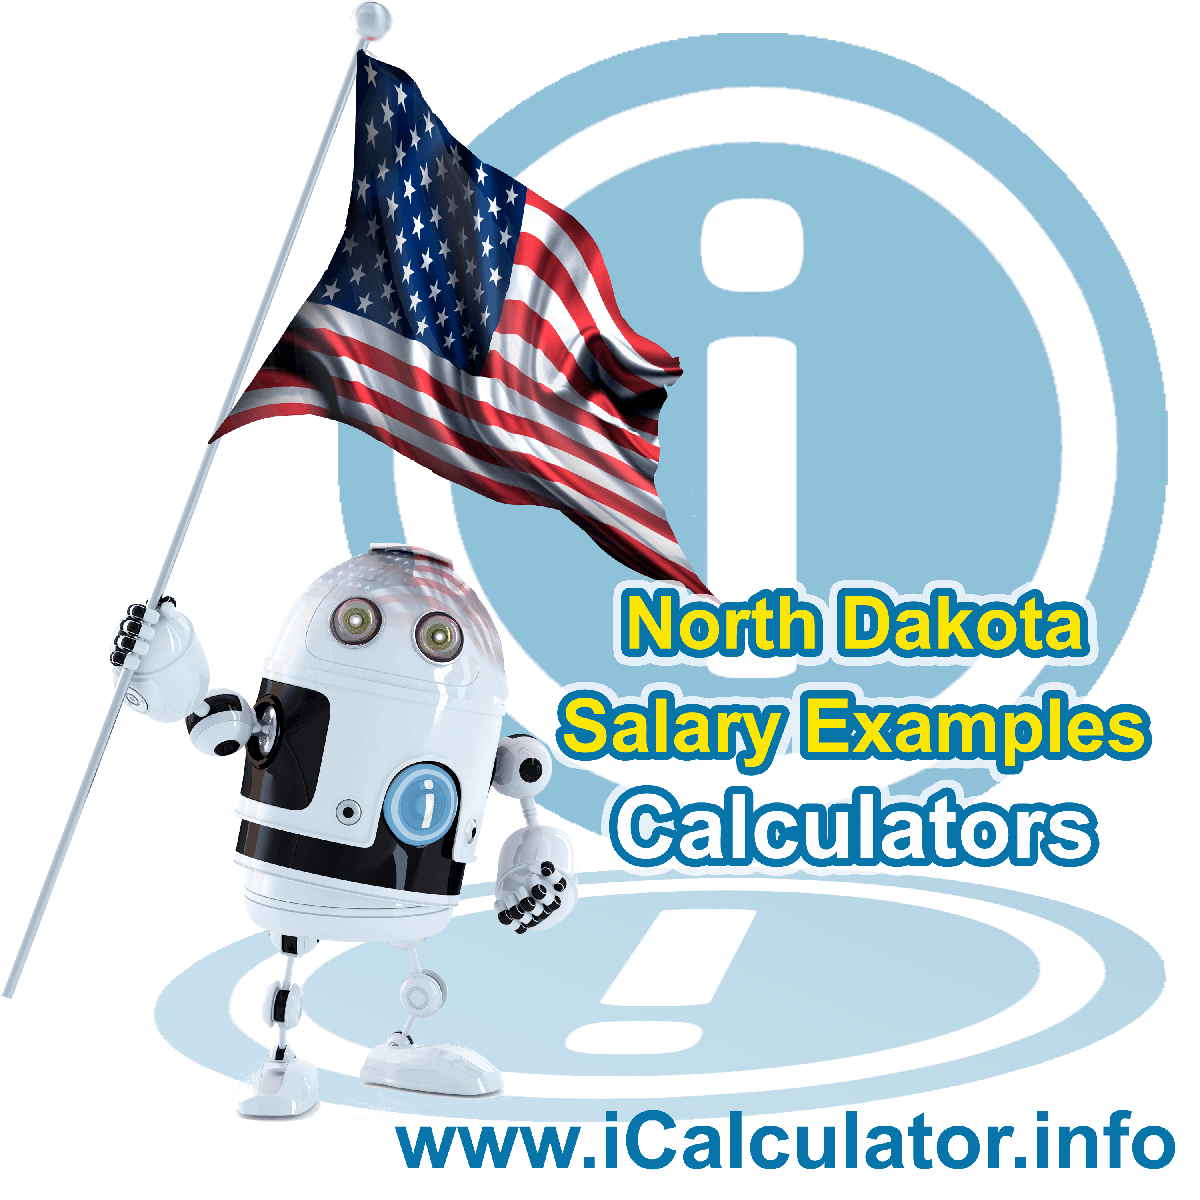 North Dakota Salary Example for $ 10,000.00 in 2023 | iCalculator™ | $ 10,000.00 salary example for employee and employer paying North Dakota State tincome taxes. Detailed salary after tax calculation including North Dakota State Tax, Federal State Tax, Medicare Deductions, Social Security, Capital Gains and other income tax and salary deductions complete with supporting North Dakota state tax tables 